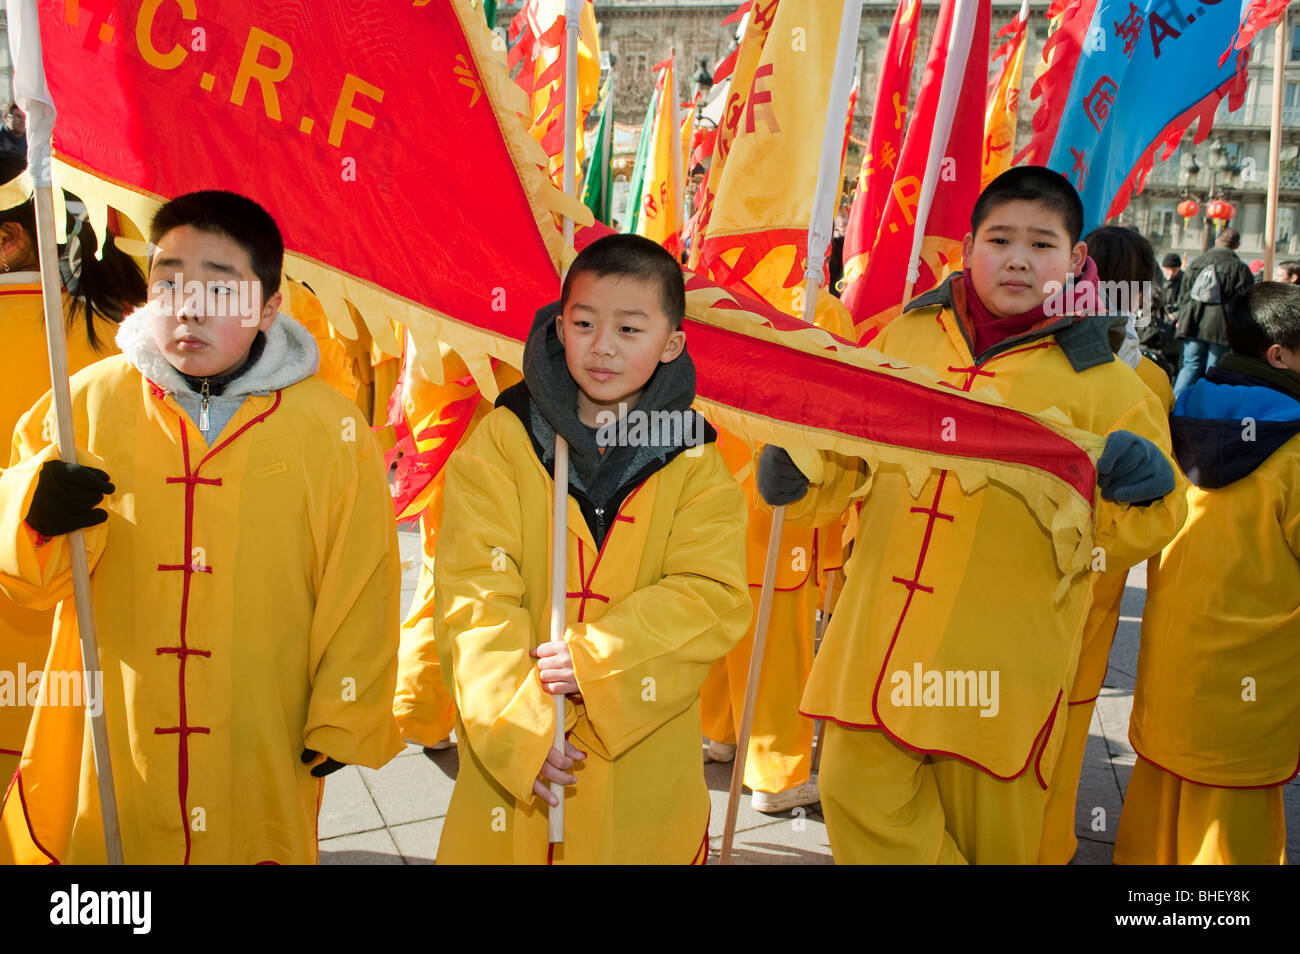 Paris, France, Group People, Asians Celebrating 'Chinese New year' Annual Street Carnival Parade, Chinese Children in Traditional costumes Stock Photo